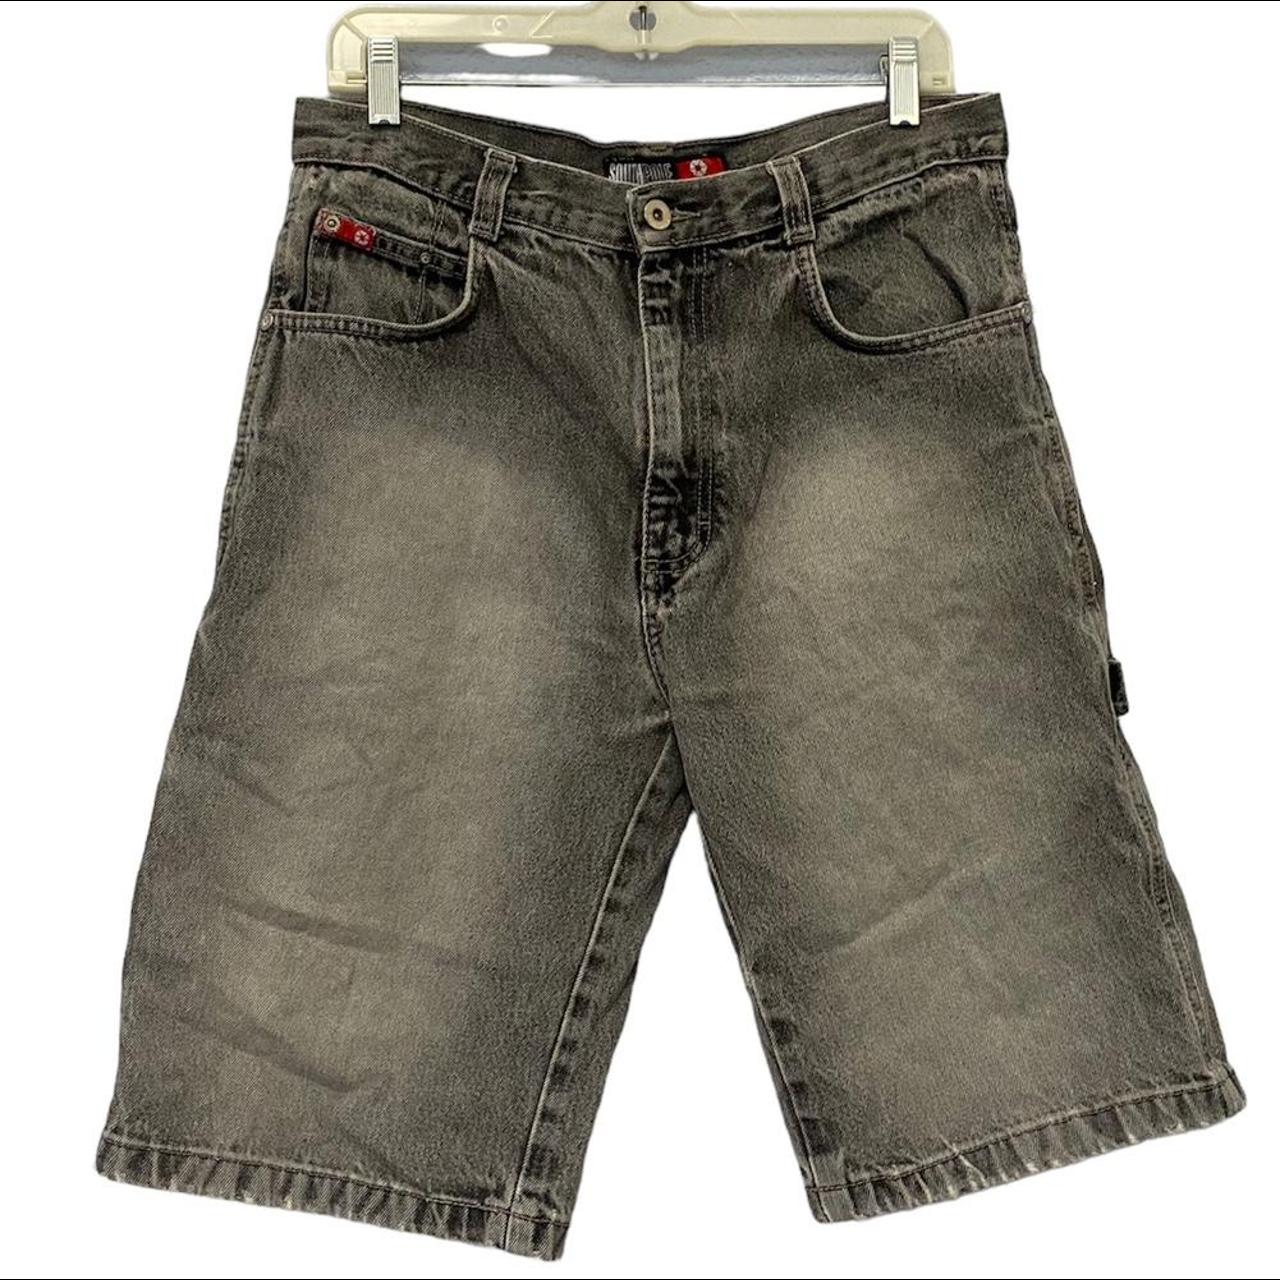 SOUTHPOLE JORTS send offers!! FREE SHIPPING WITH... - Depop